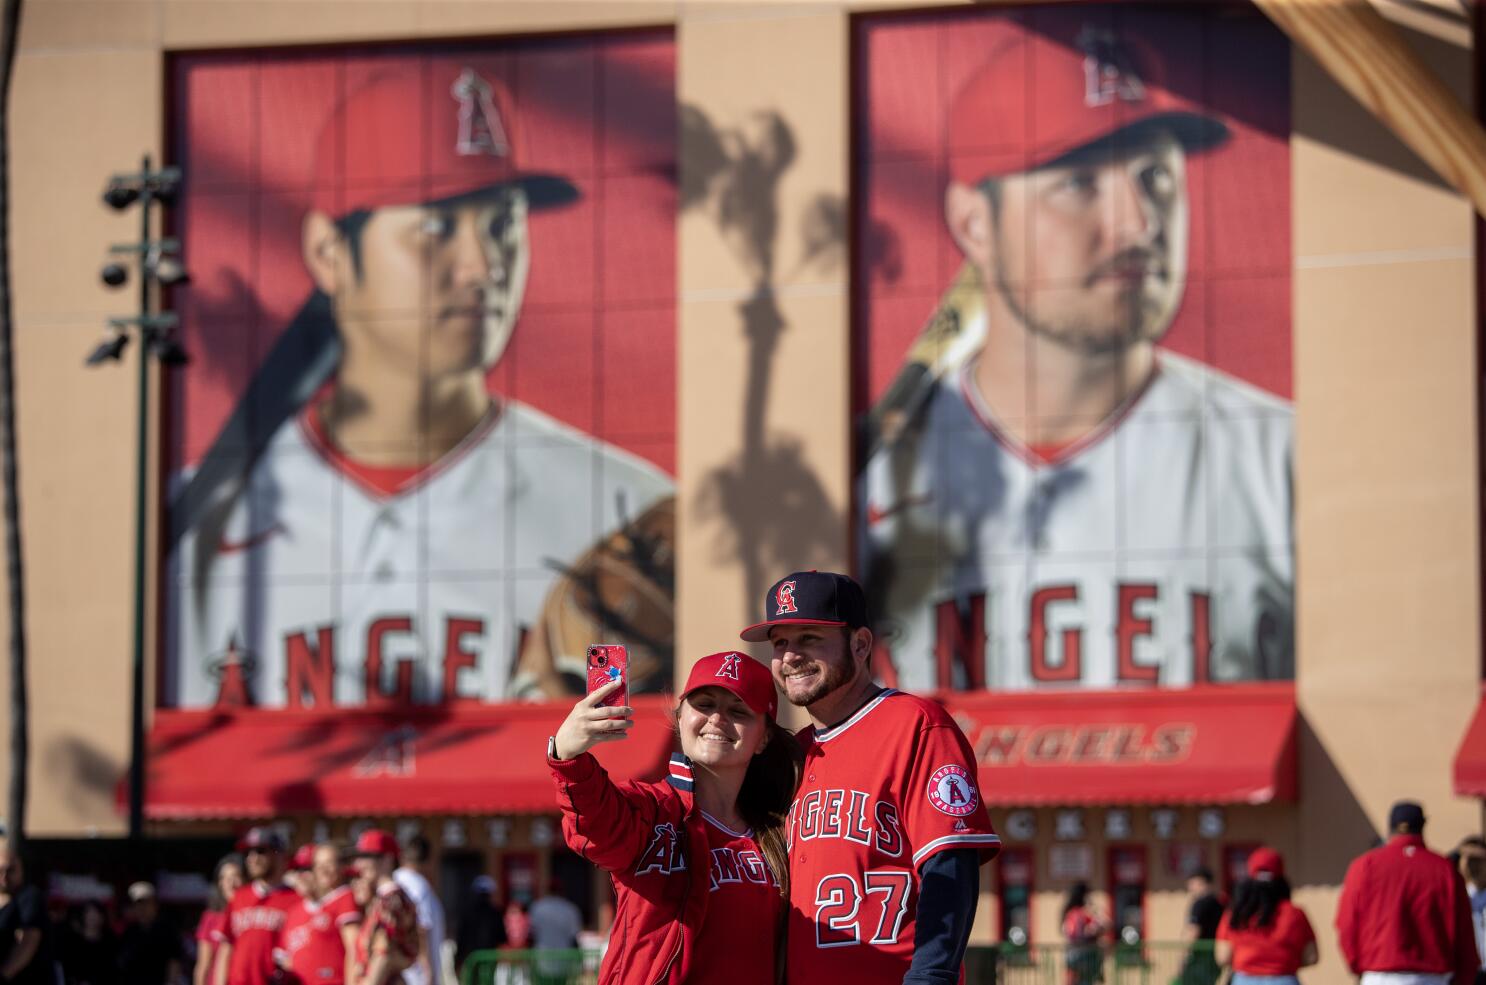 Shohei Ohtani makes Angels an international tourist attraction - Los  Angeles Times